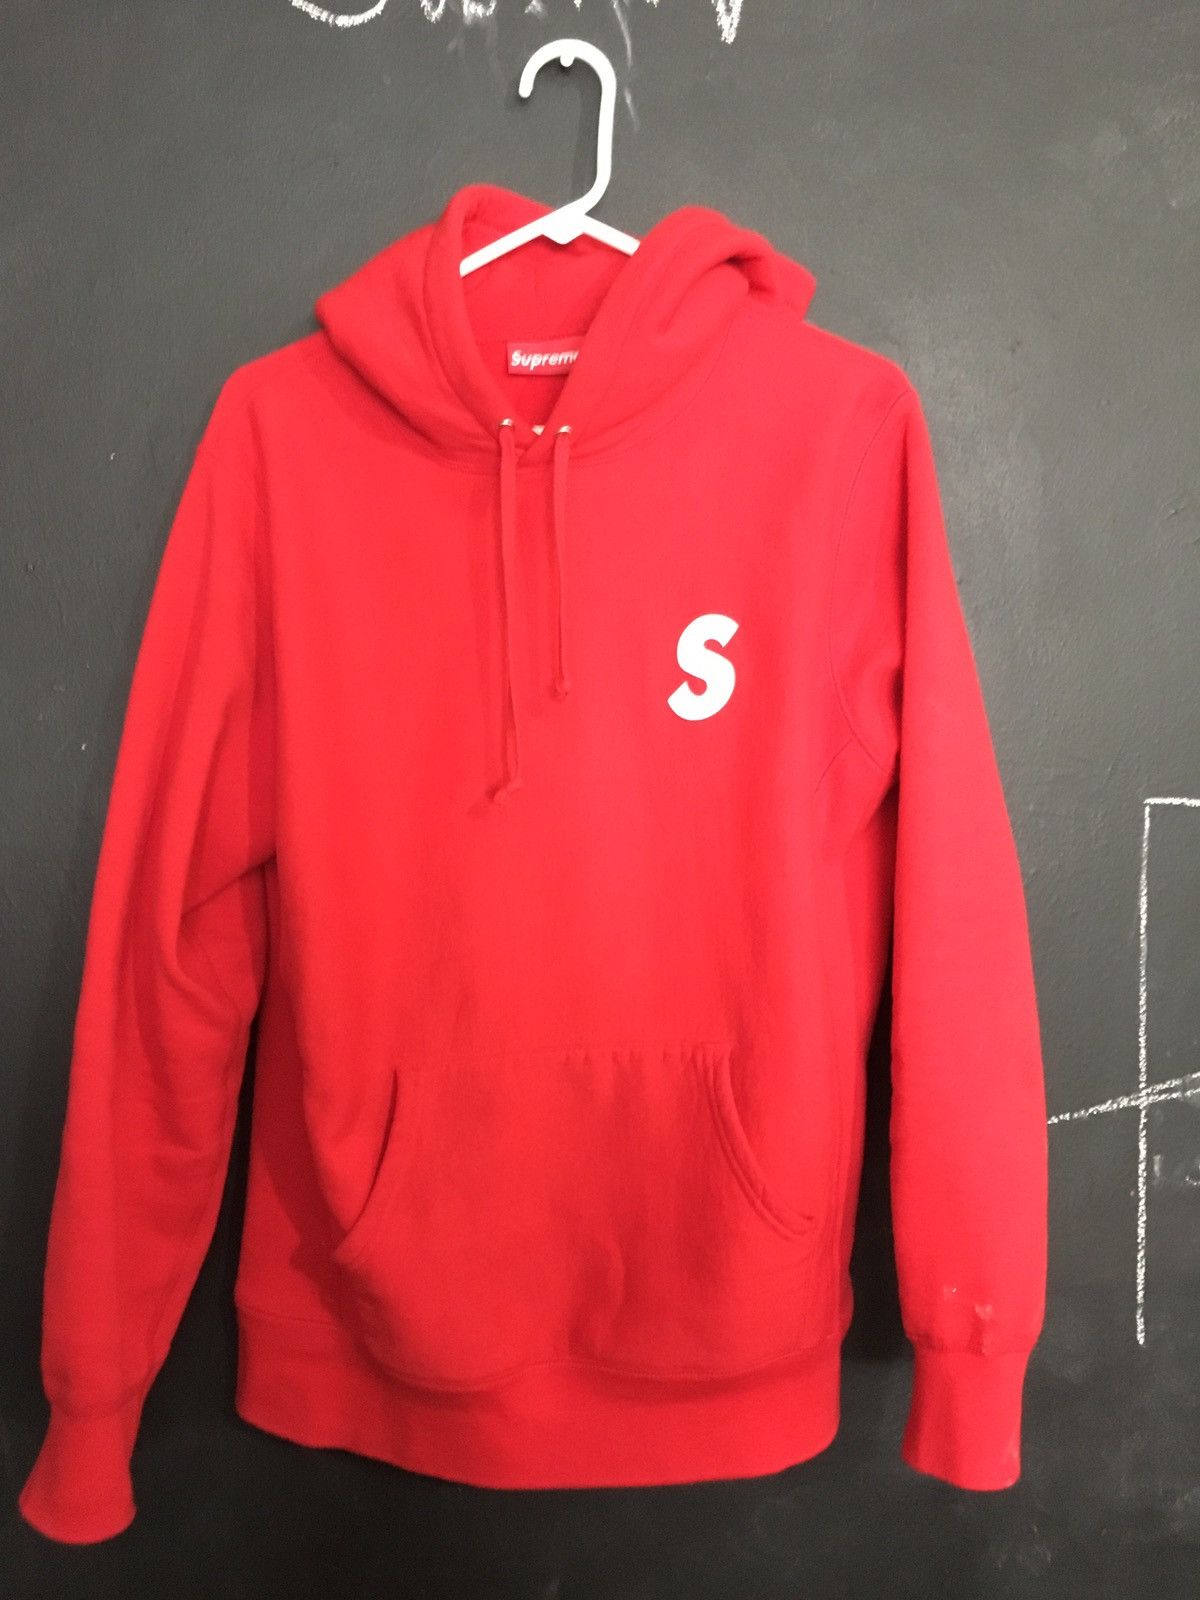 Supreme 3M Reflective S Logo Hoodie - Red Size US M / EU 48-50 / 2 - 2 Preview